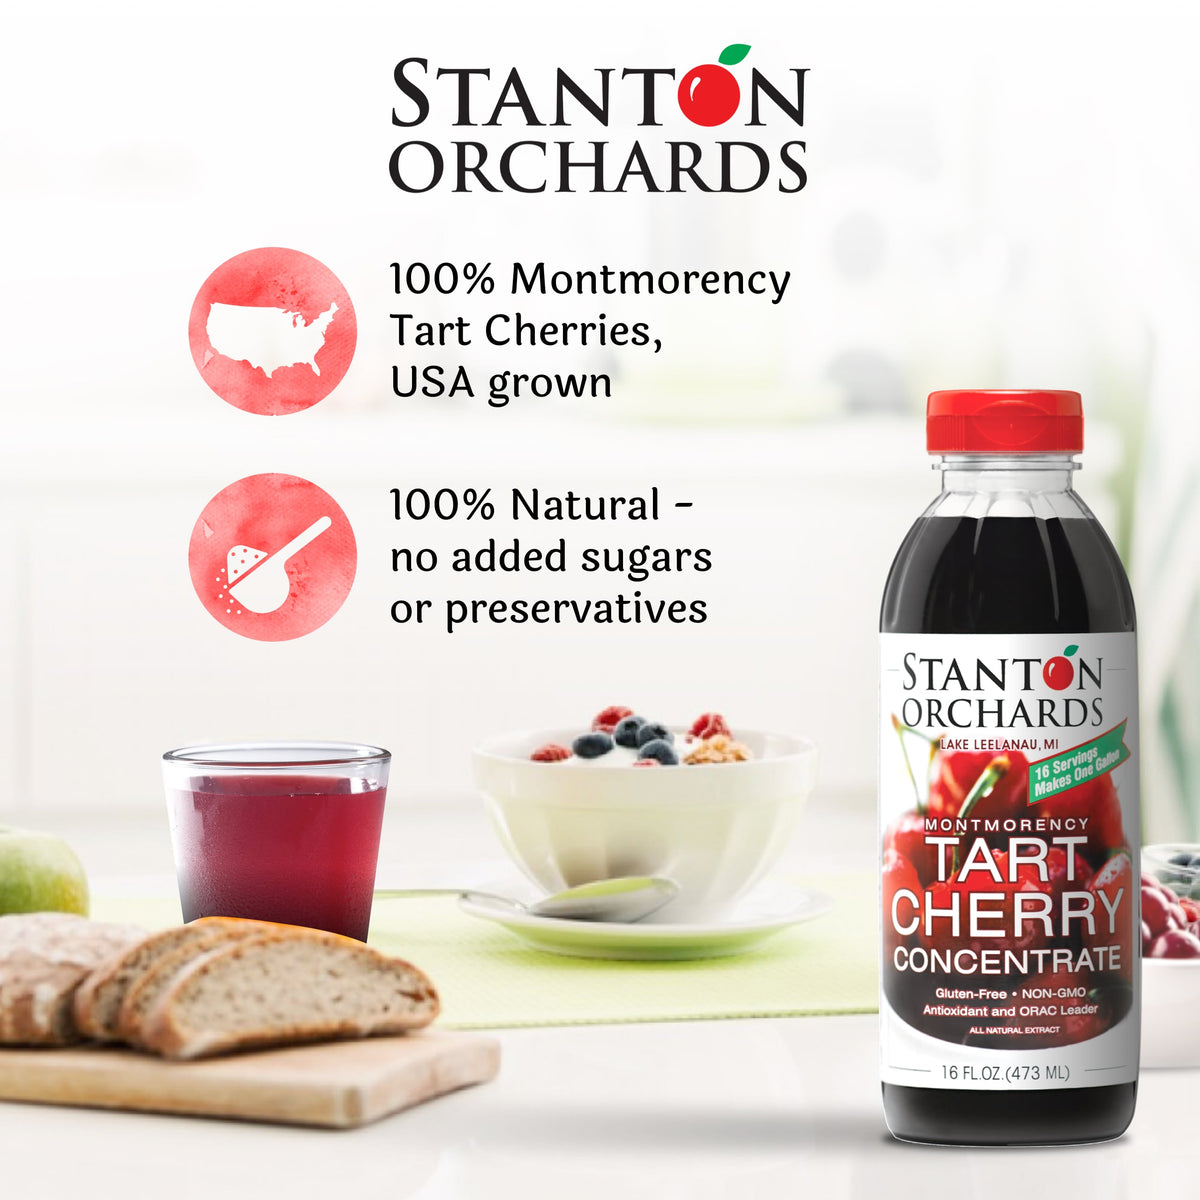 16 oz. Bottle of Stanton Orchards Tart Cherry Concentrate